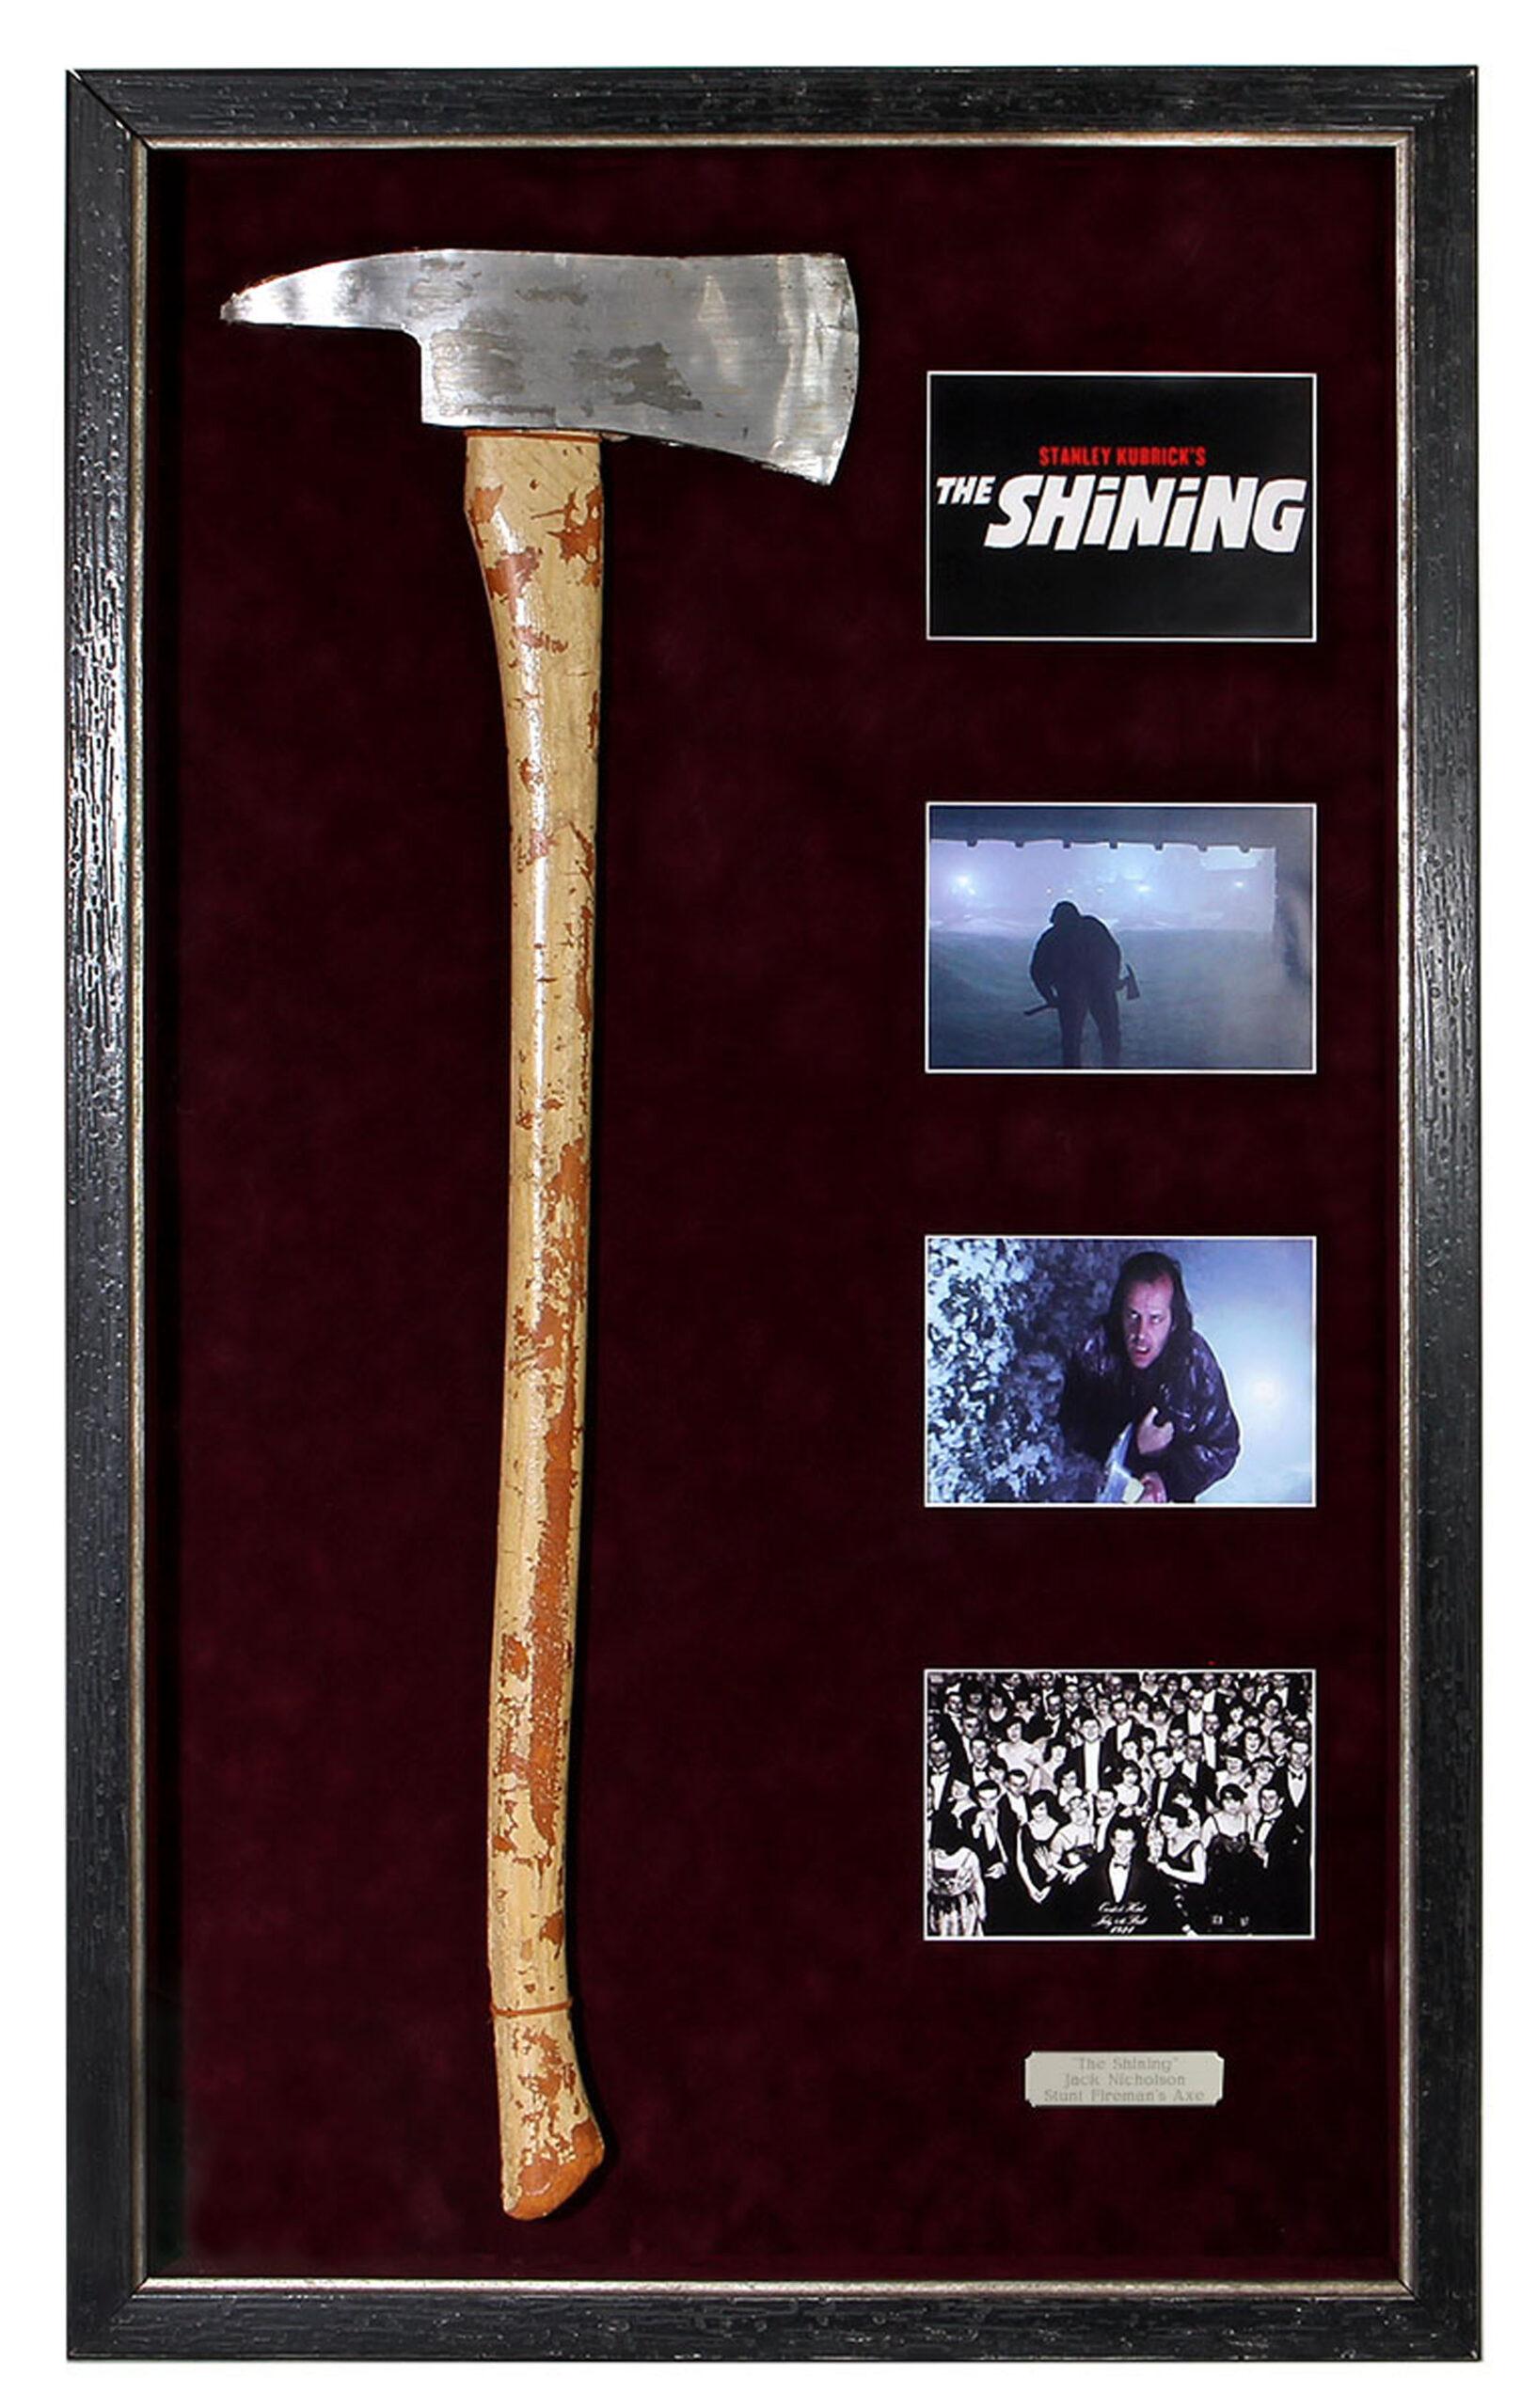 Axe from The Shining set to sell for more than $100,000 at auction